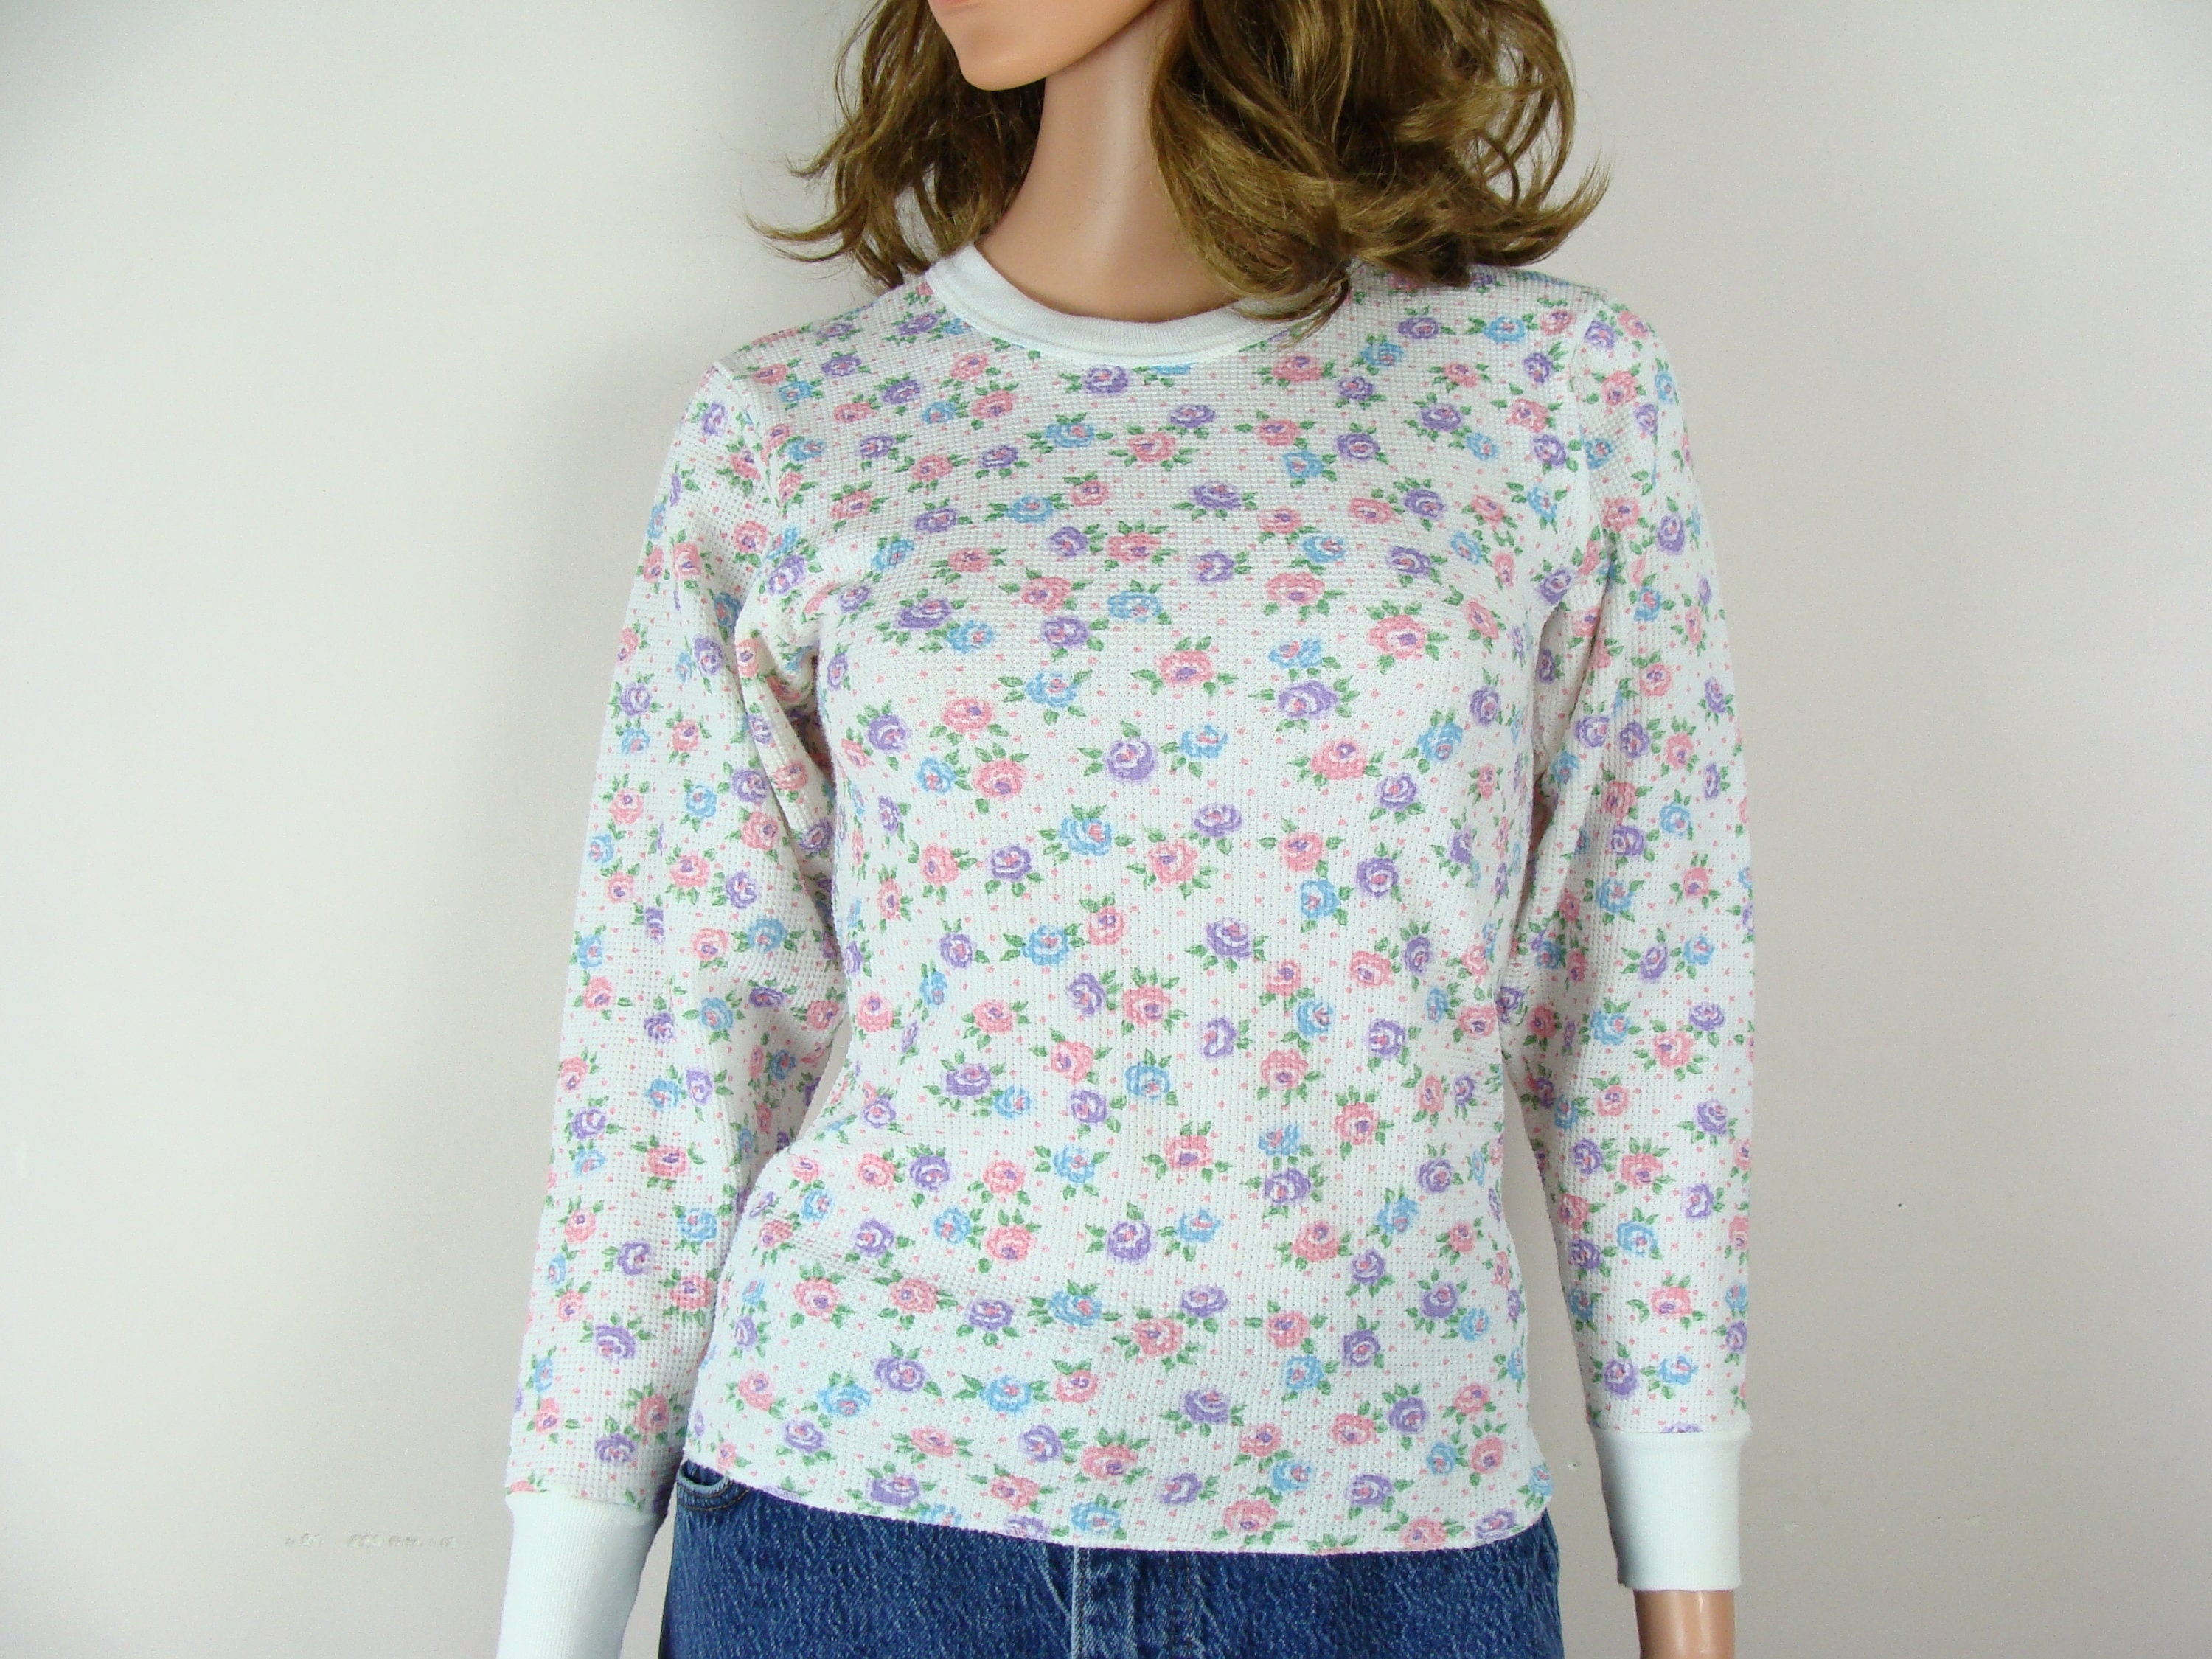 Vintage Thermal Shirt 80s Floral Print Waffle Knit Long Sleeve Top 90s  Comfy Club Made in USA Girl's Size 14 / 16 Polka Dot Pastel Pretty -   New Zealand